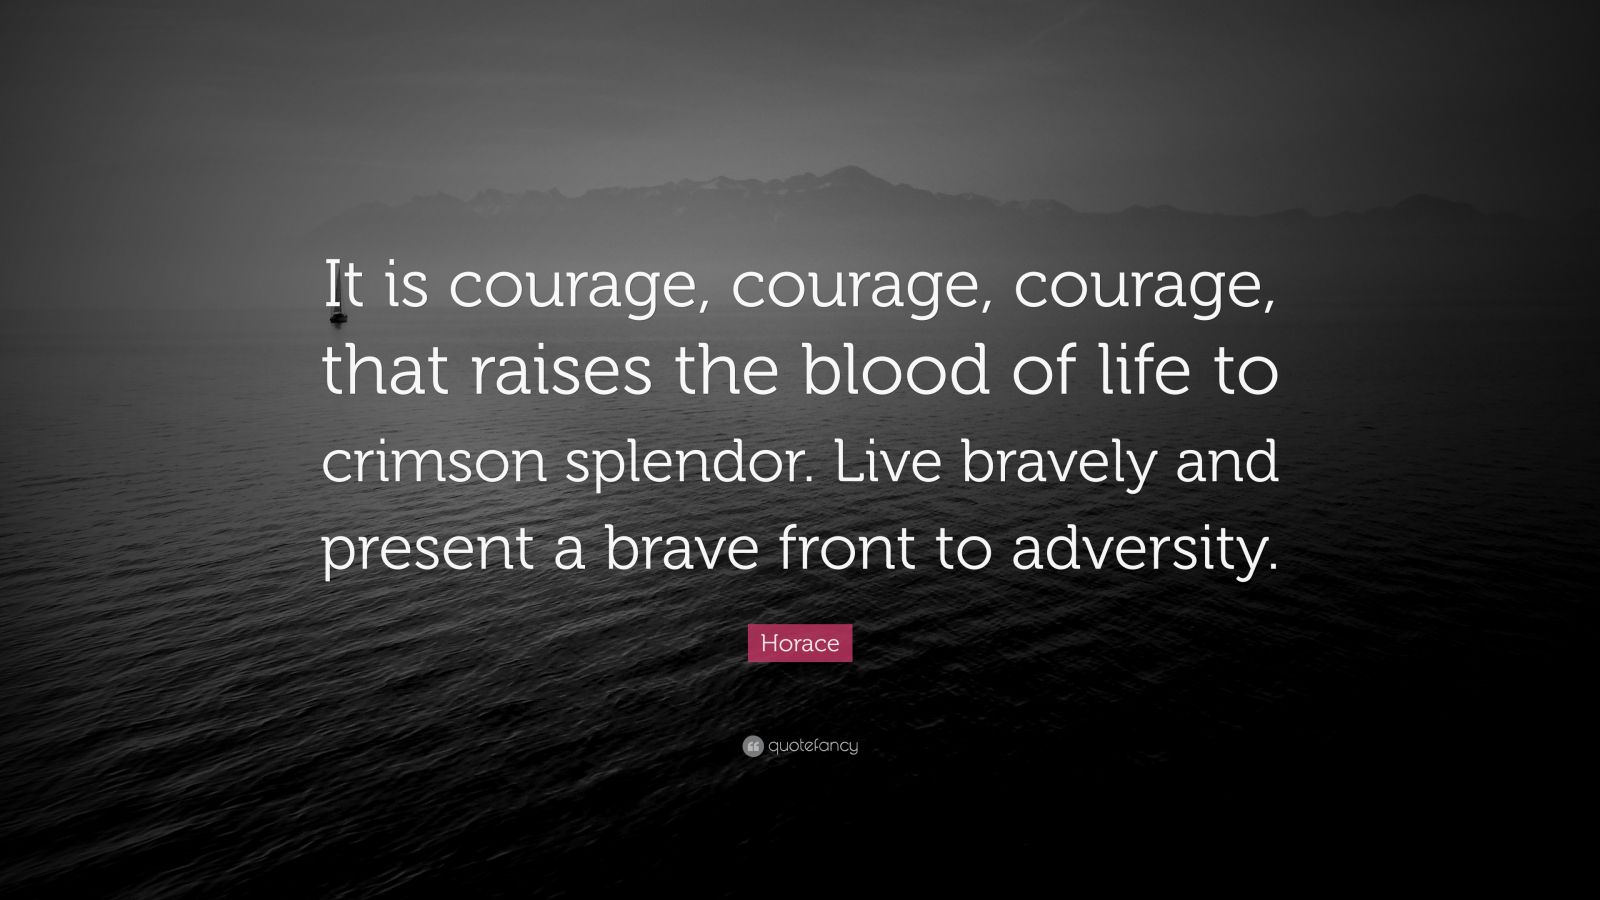 Horace Quote: “It is courage, courage, courage, that raises the blood ...